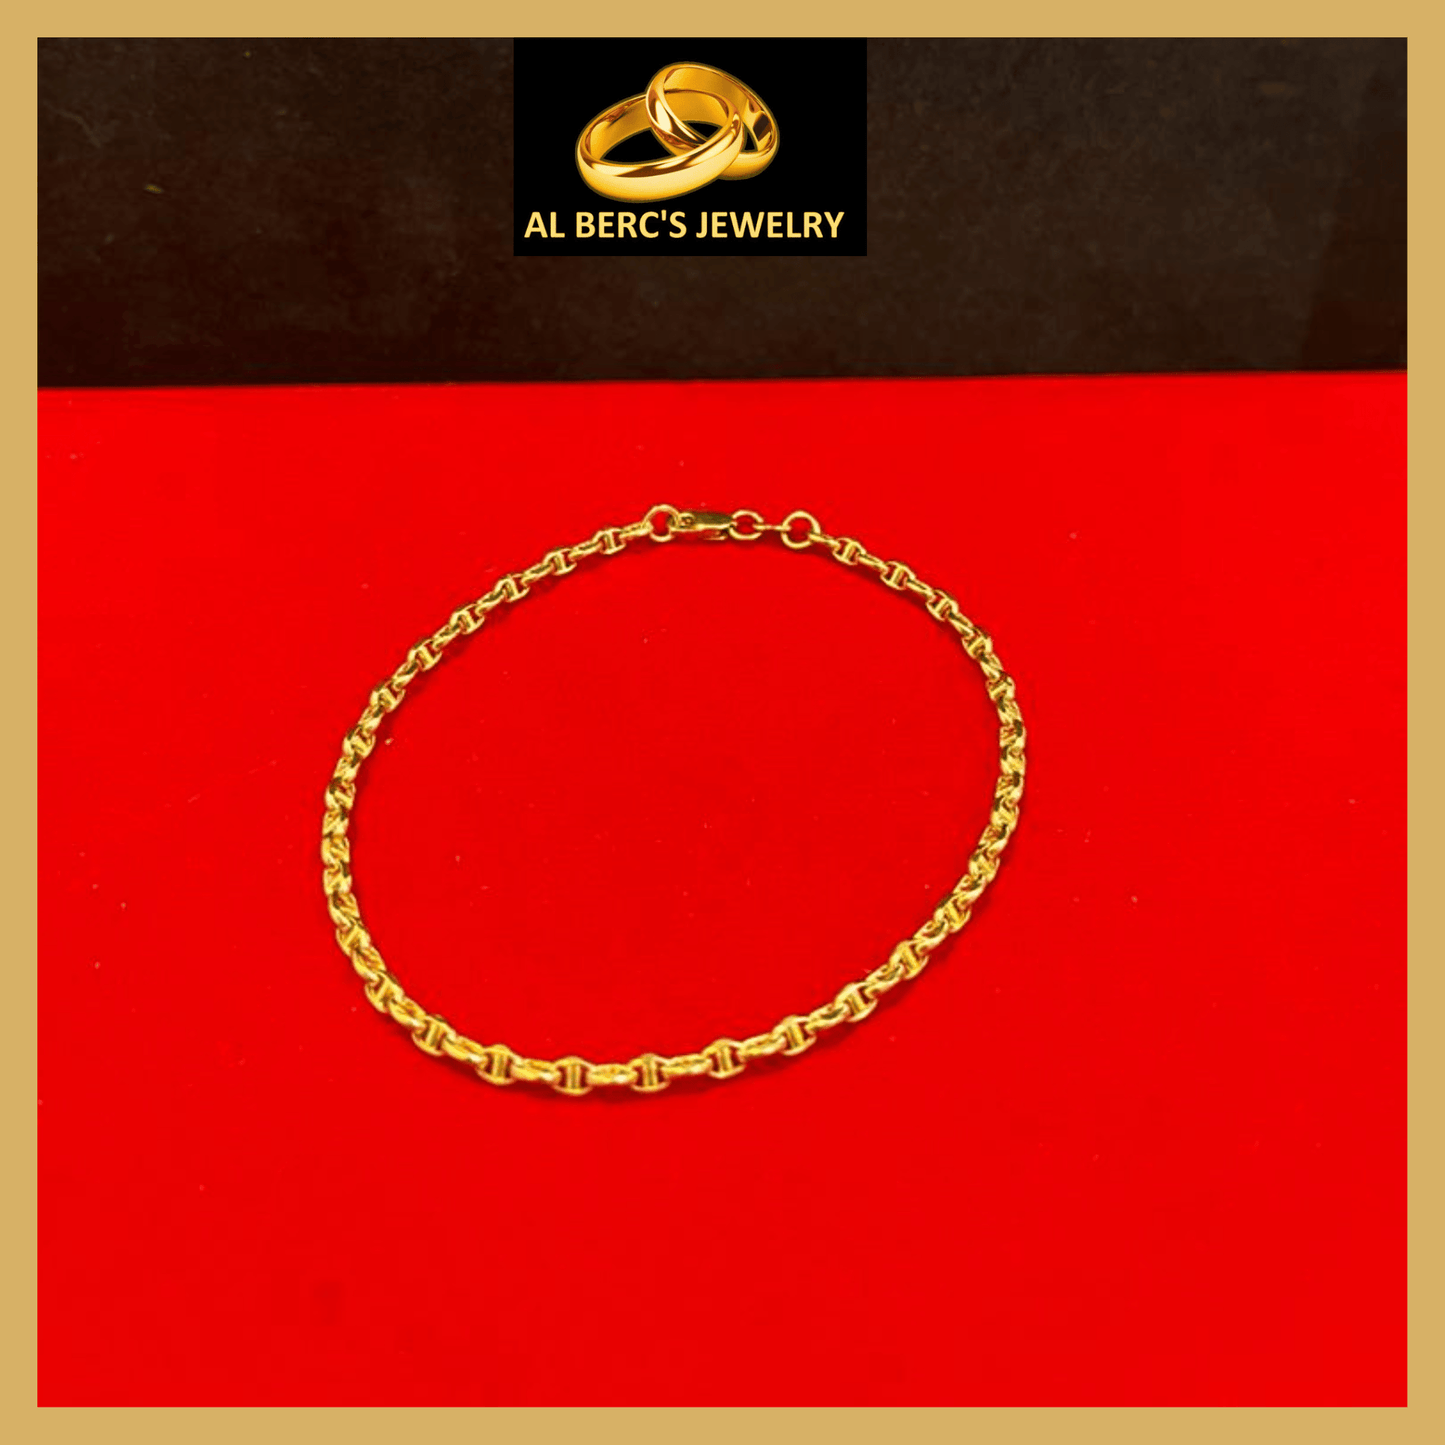 showing an 18K Gold Bracelet for Women with chain-like design